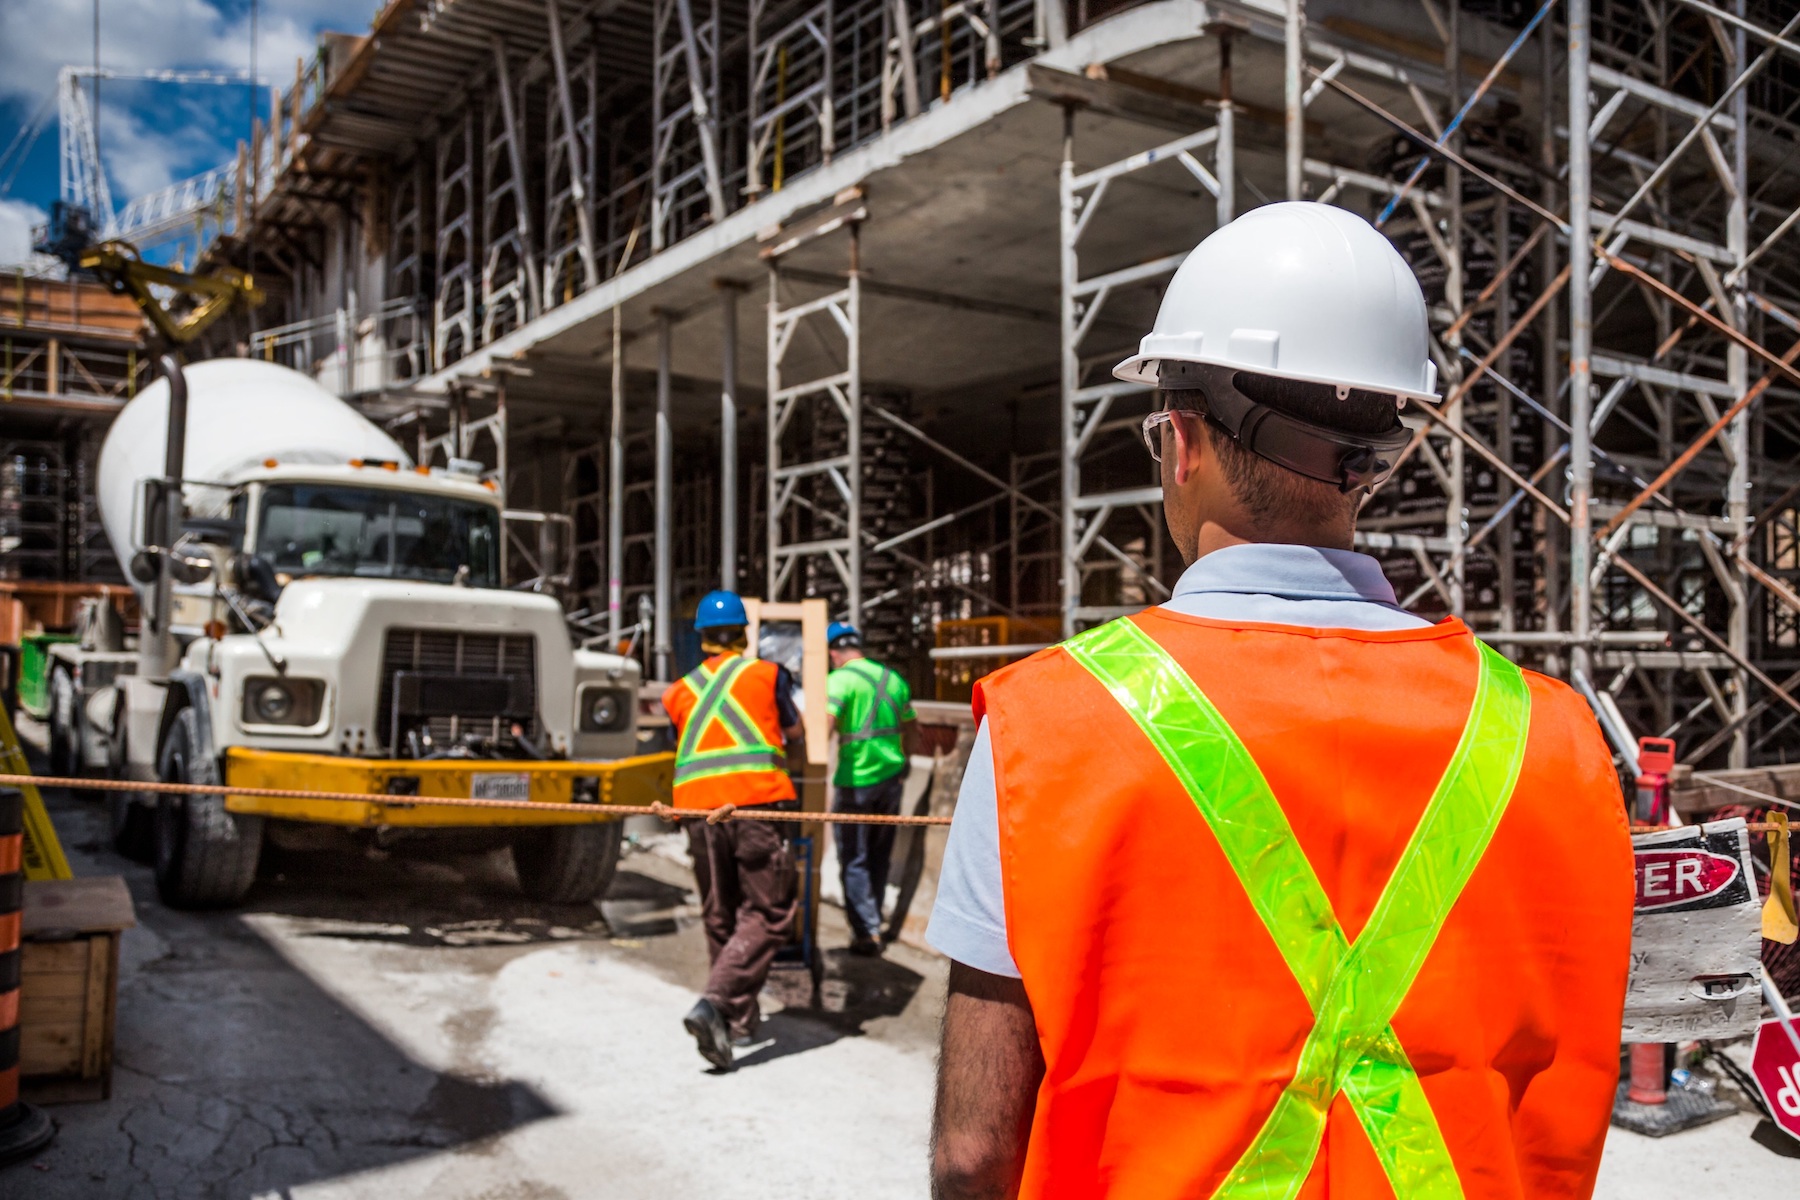 Workers on worksite who might need a work place injury attorney in Baton Rouge